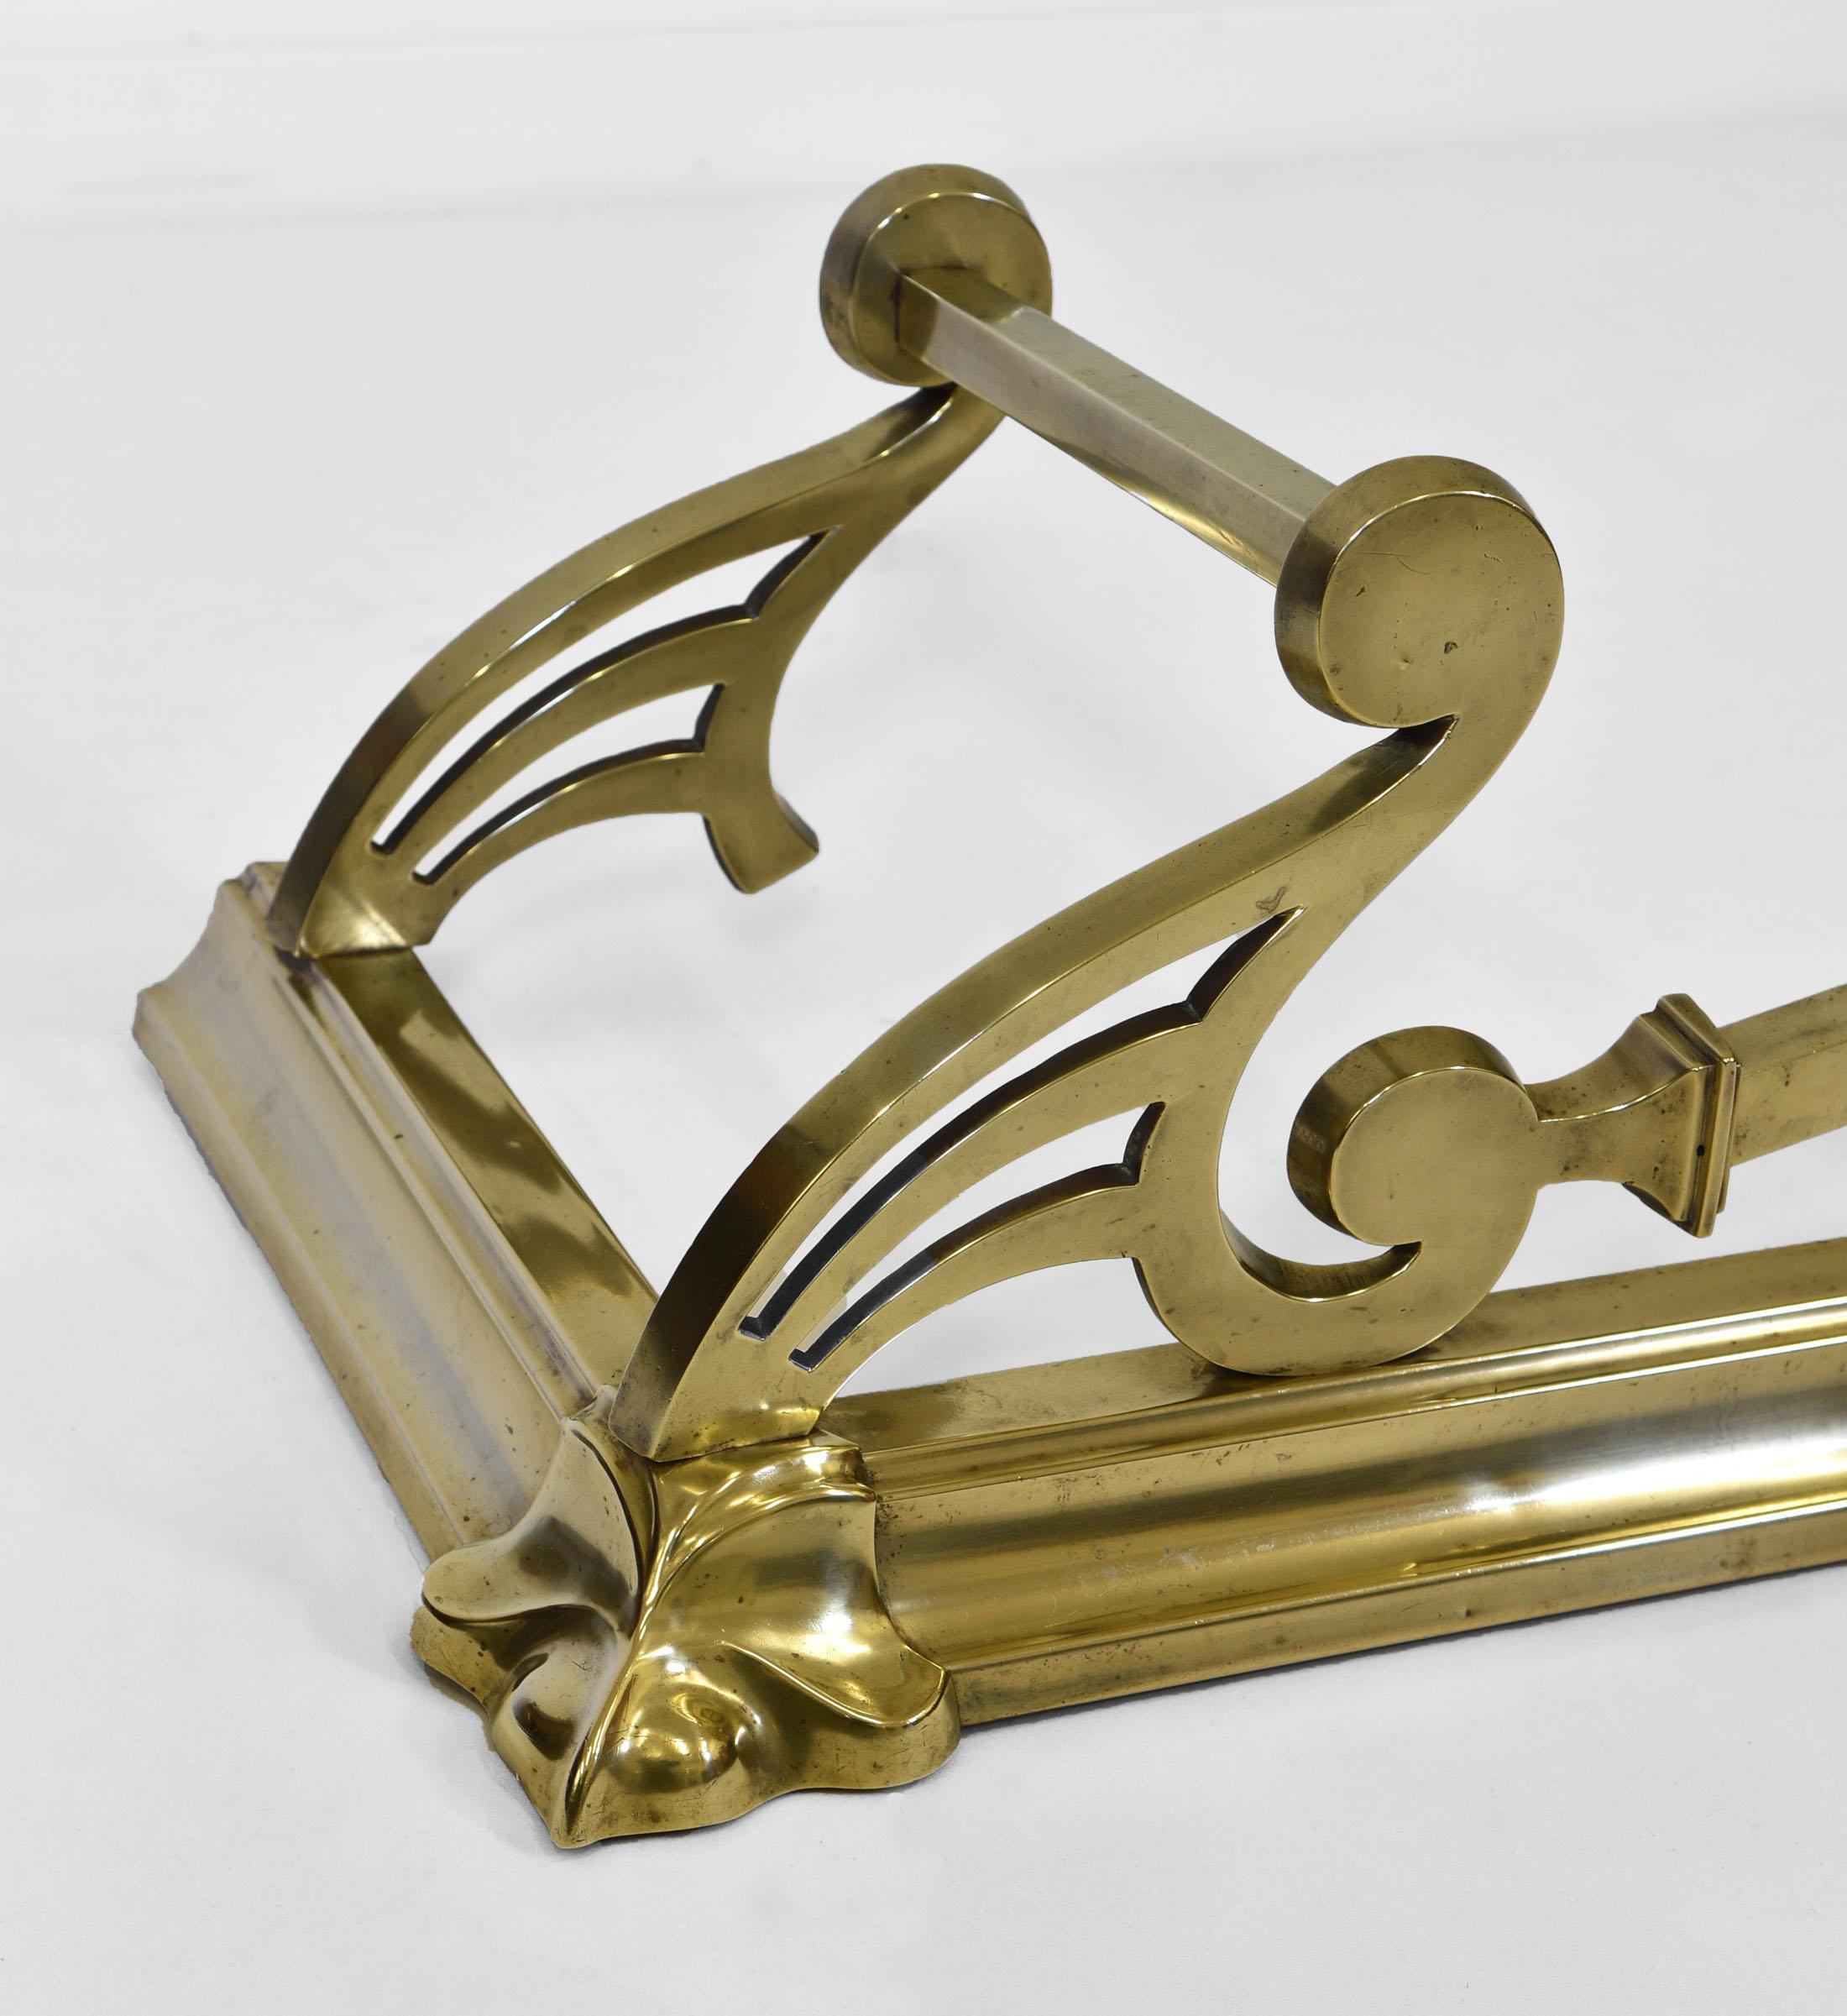 An Edwardian Art Nouveau brass fireplace fender. Circa 1900.

The fender is structurally solid and in very good condition, with a few knocks in places.

The inside measures 122.5cm wide x 30cm deep.